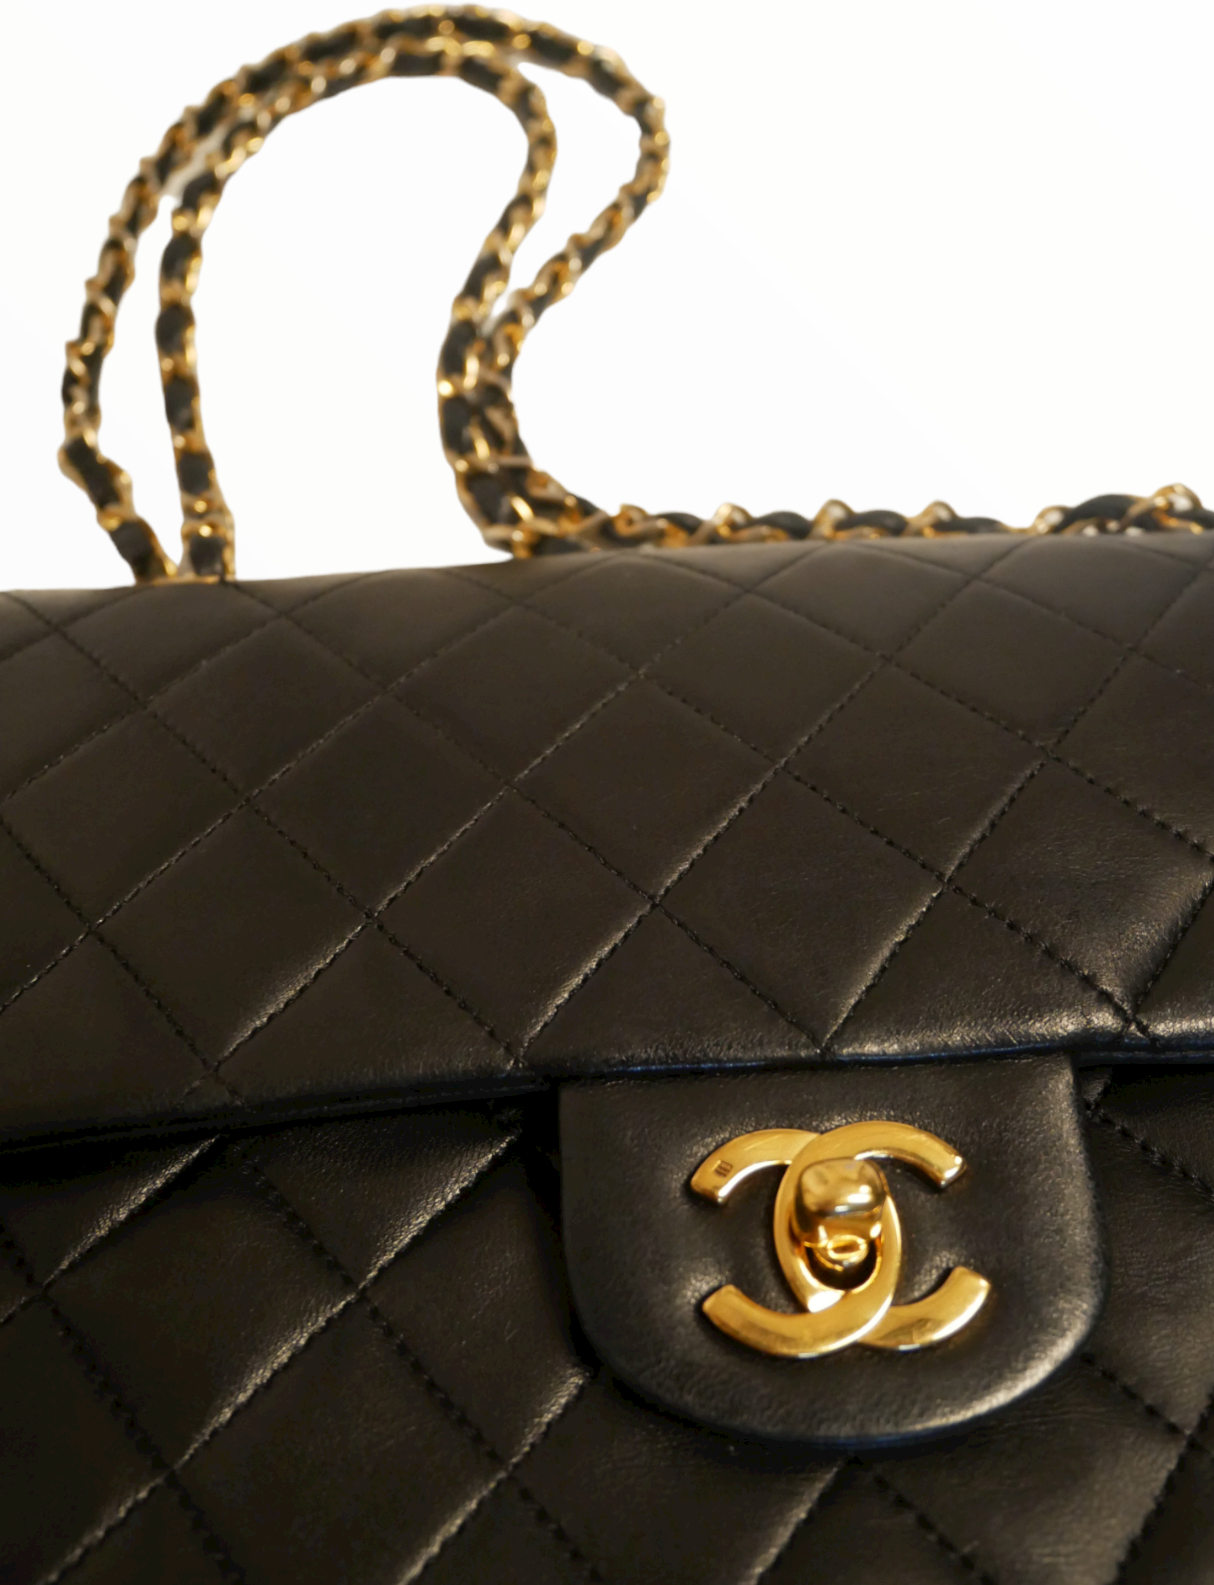 Vintage Chanel bags  Our second hand  second hand Chanel luxury bags   Vintega